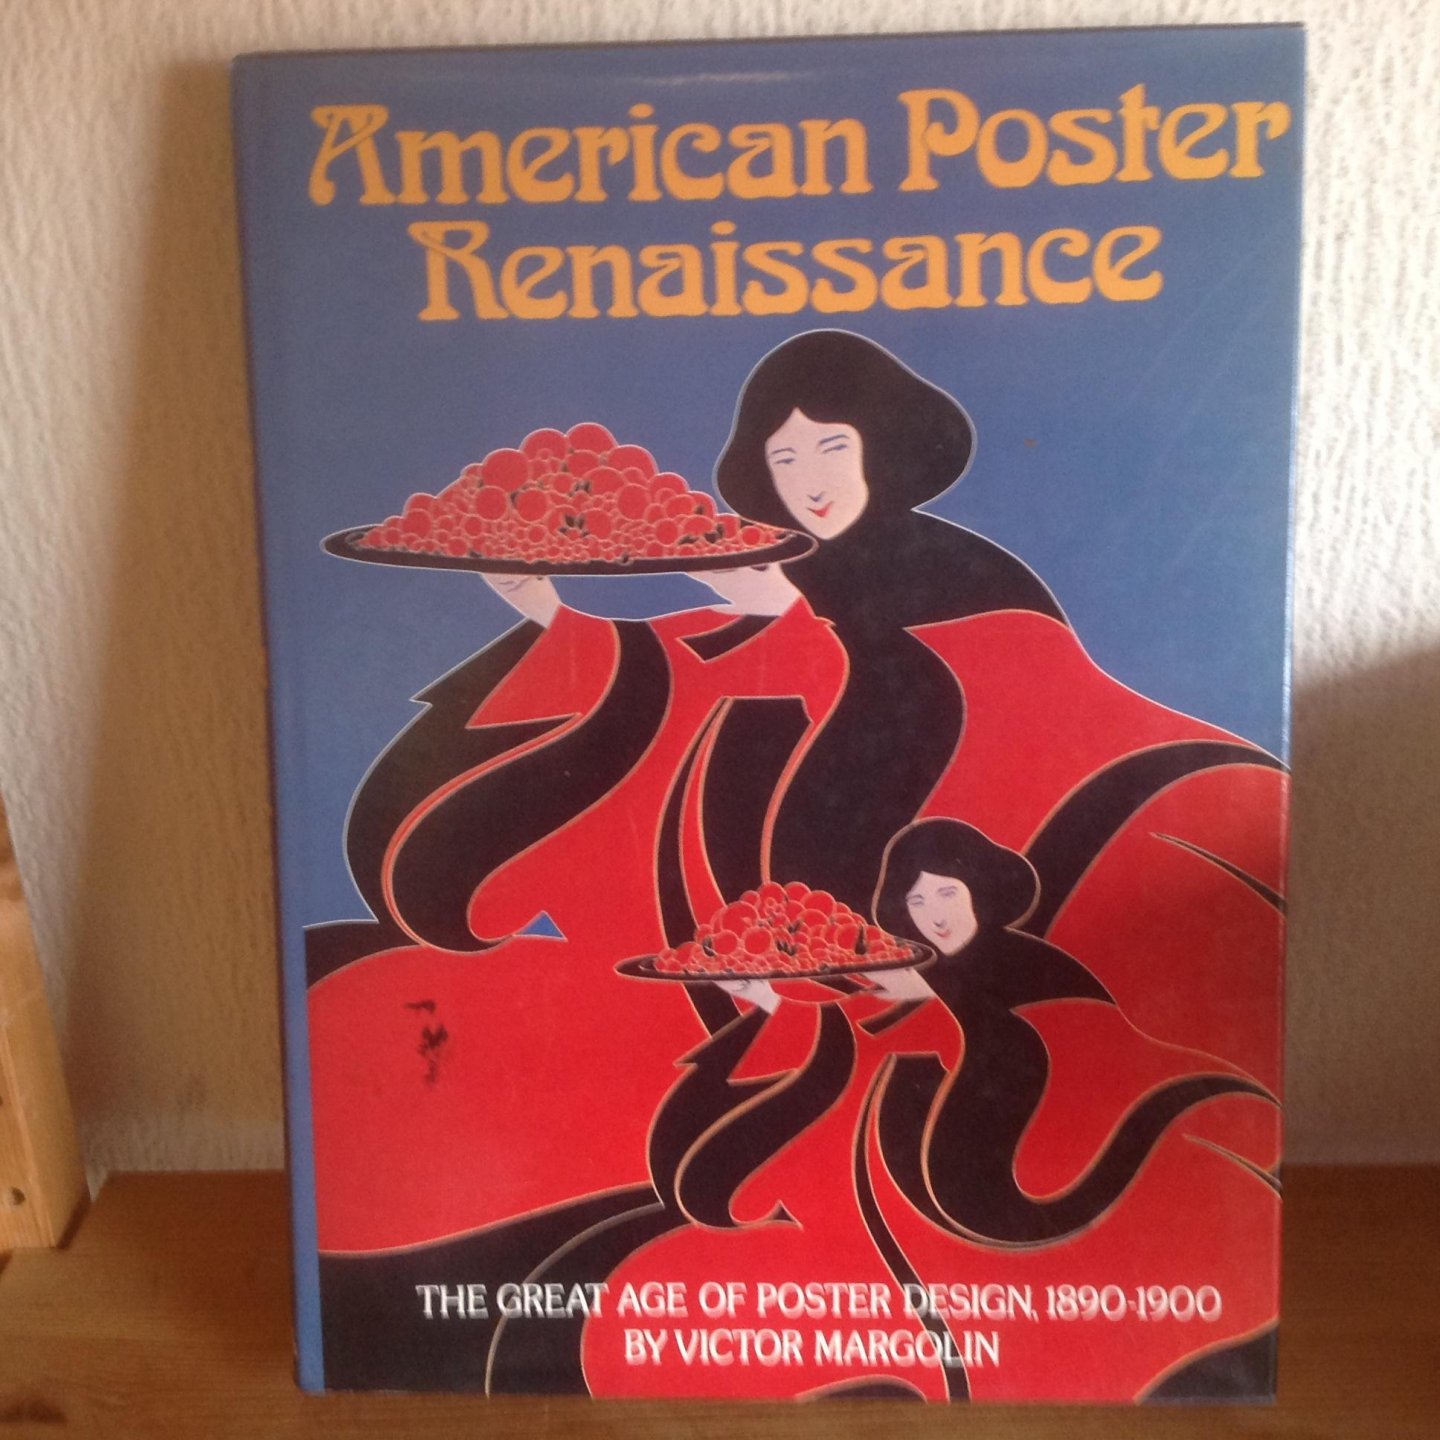  - AMERICAN POSTER RENAISSANCE ,THE GREAT AGE OF POSTER DESIGN 1890-1900